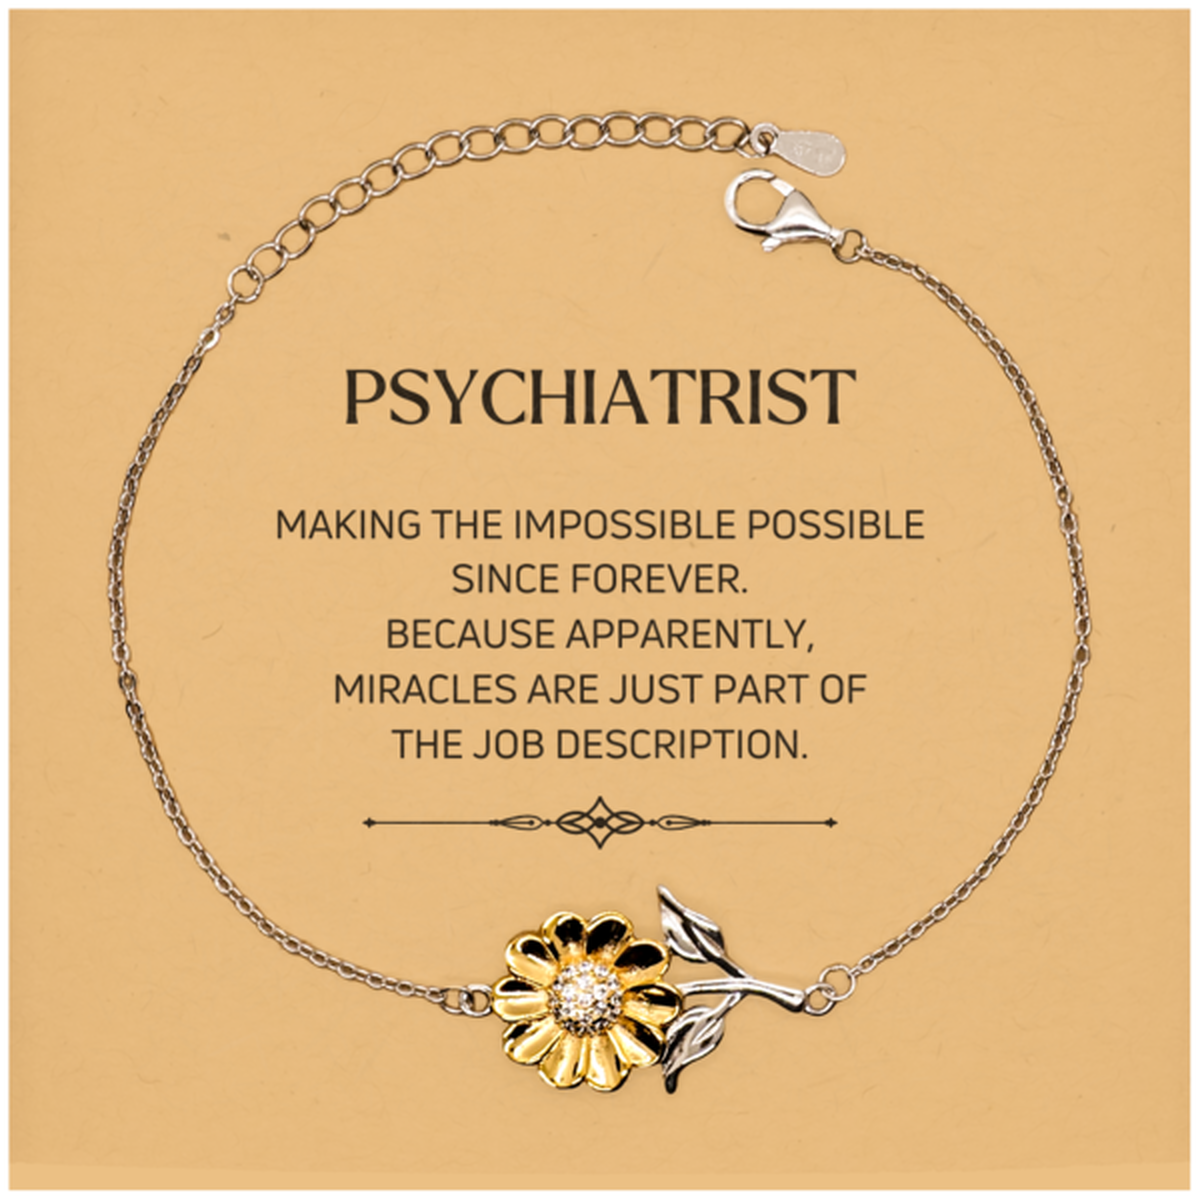 Funny Psychiatrist Gifts, Miracles are just part of the job description, Inspirational Birthday Christmas Sunflower Bracelet For Psychiatrist, Men, Women, Coworkers, Friends, Boss